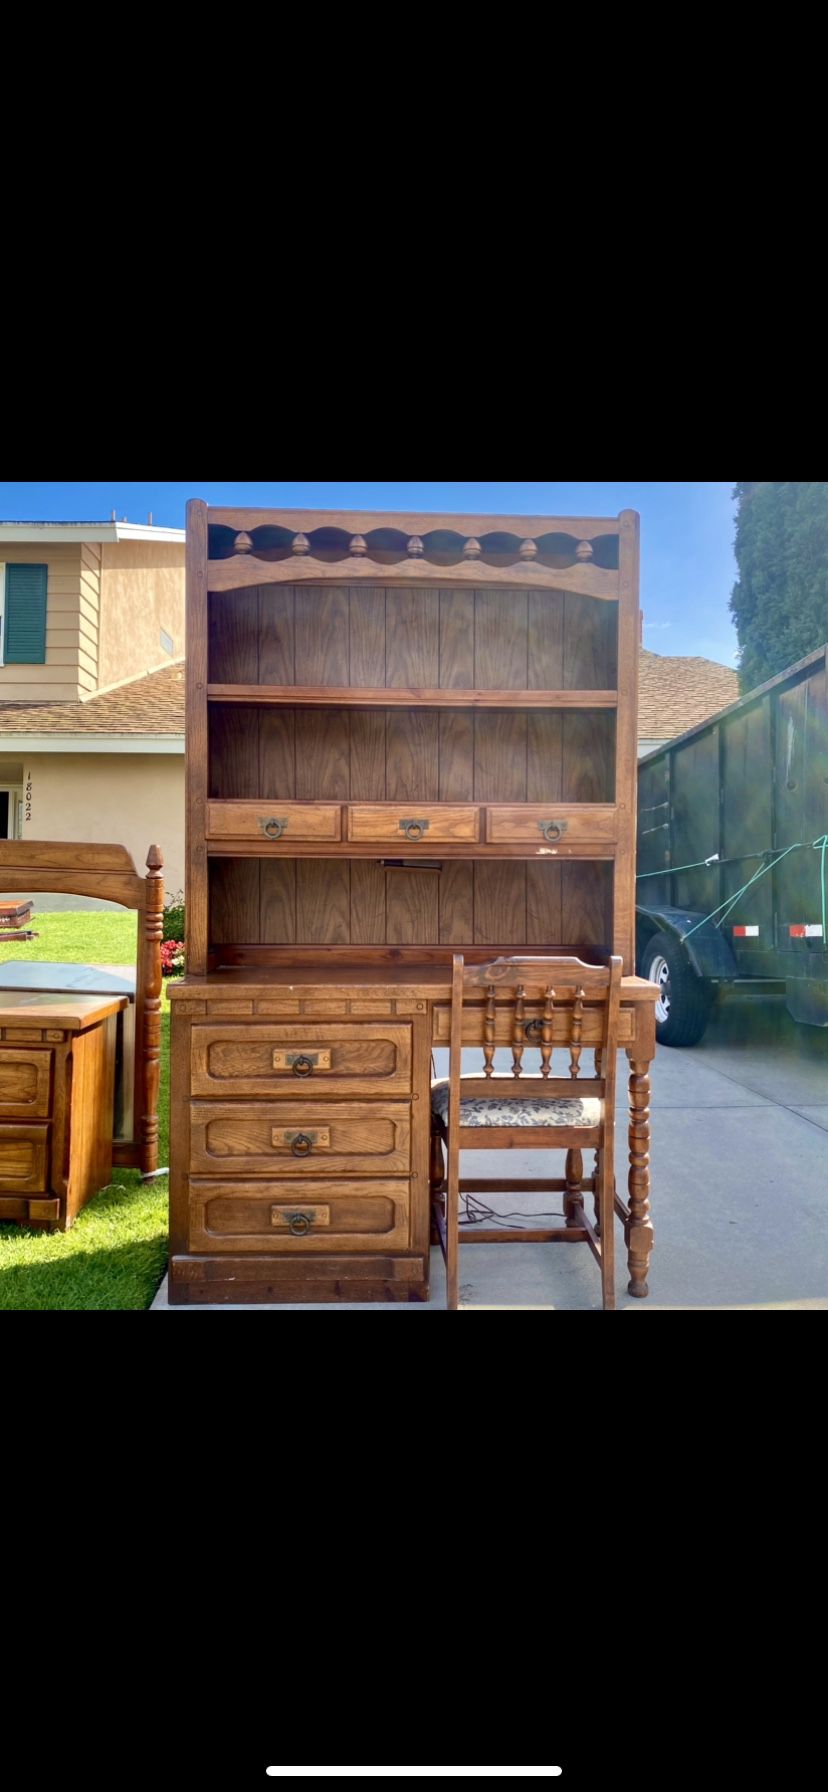 🌿 SOLID WOOD ‼️ Desk With Storage Drawers + Shelves + Chair! Child/Kid/Teen/Office, Bedroom Furniture, Solid Wood. Made in USA!